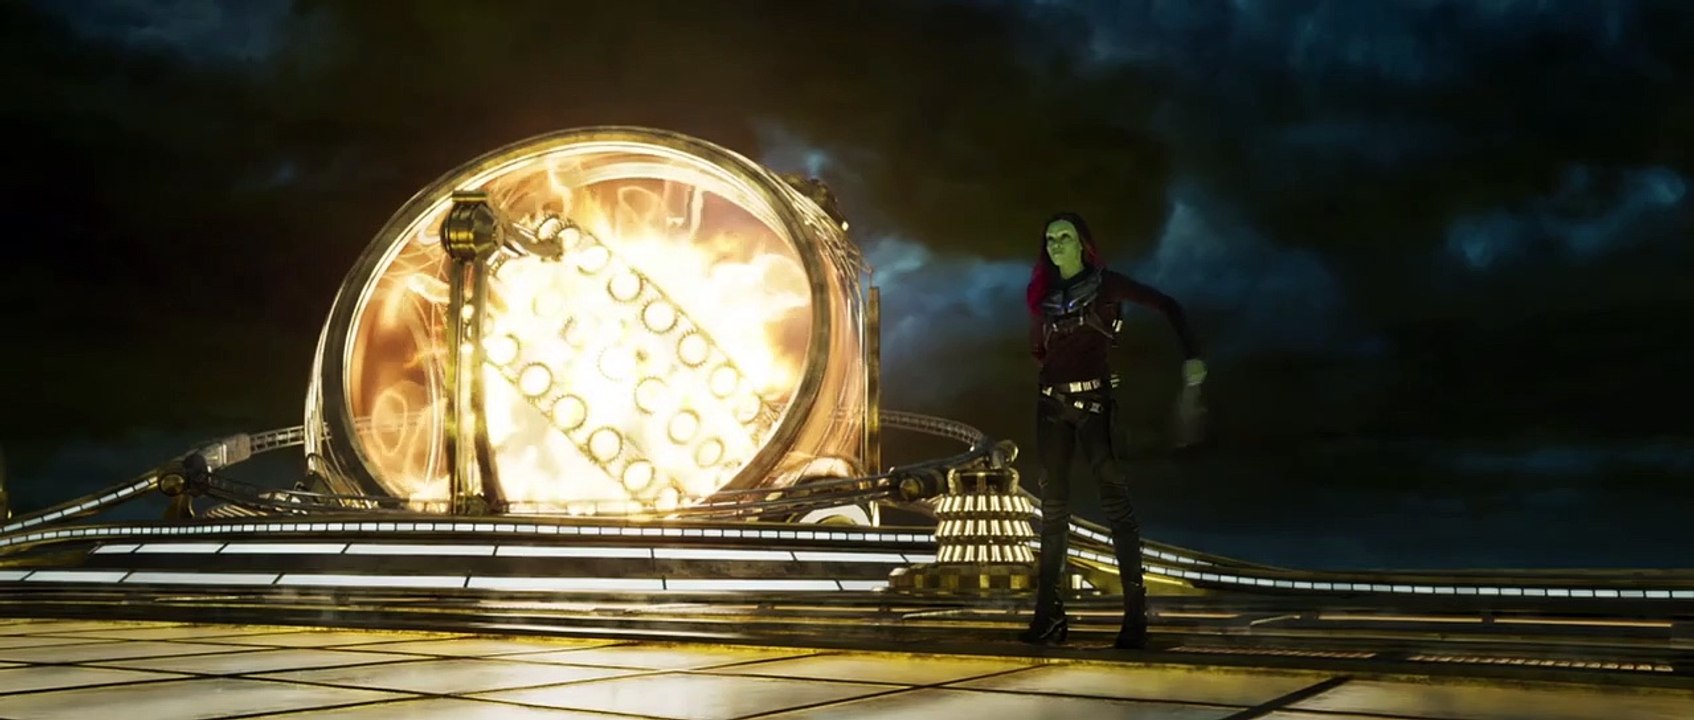 Guardians Of The Galaxy Vol. 2 Teaser (2) DF